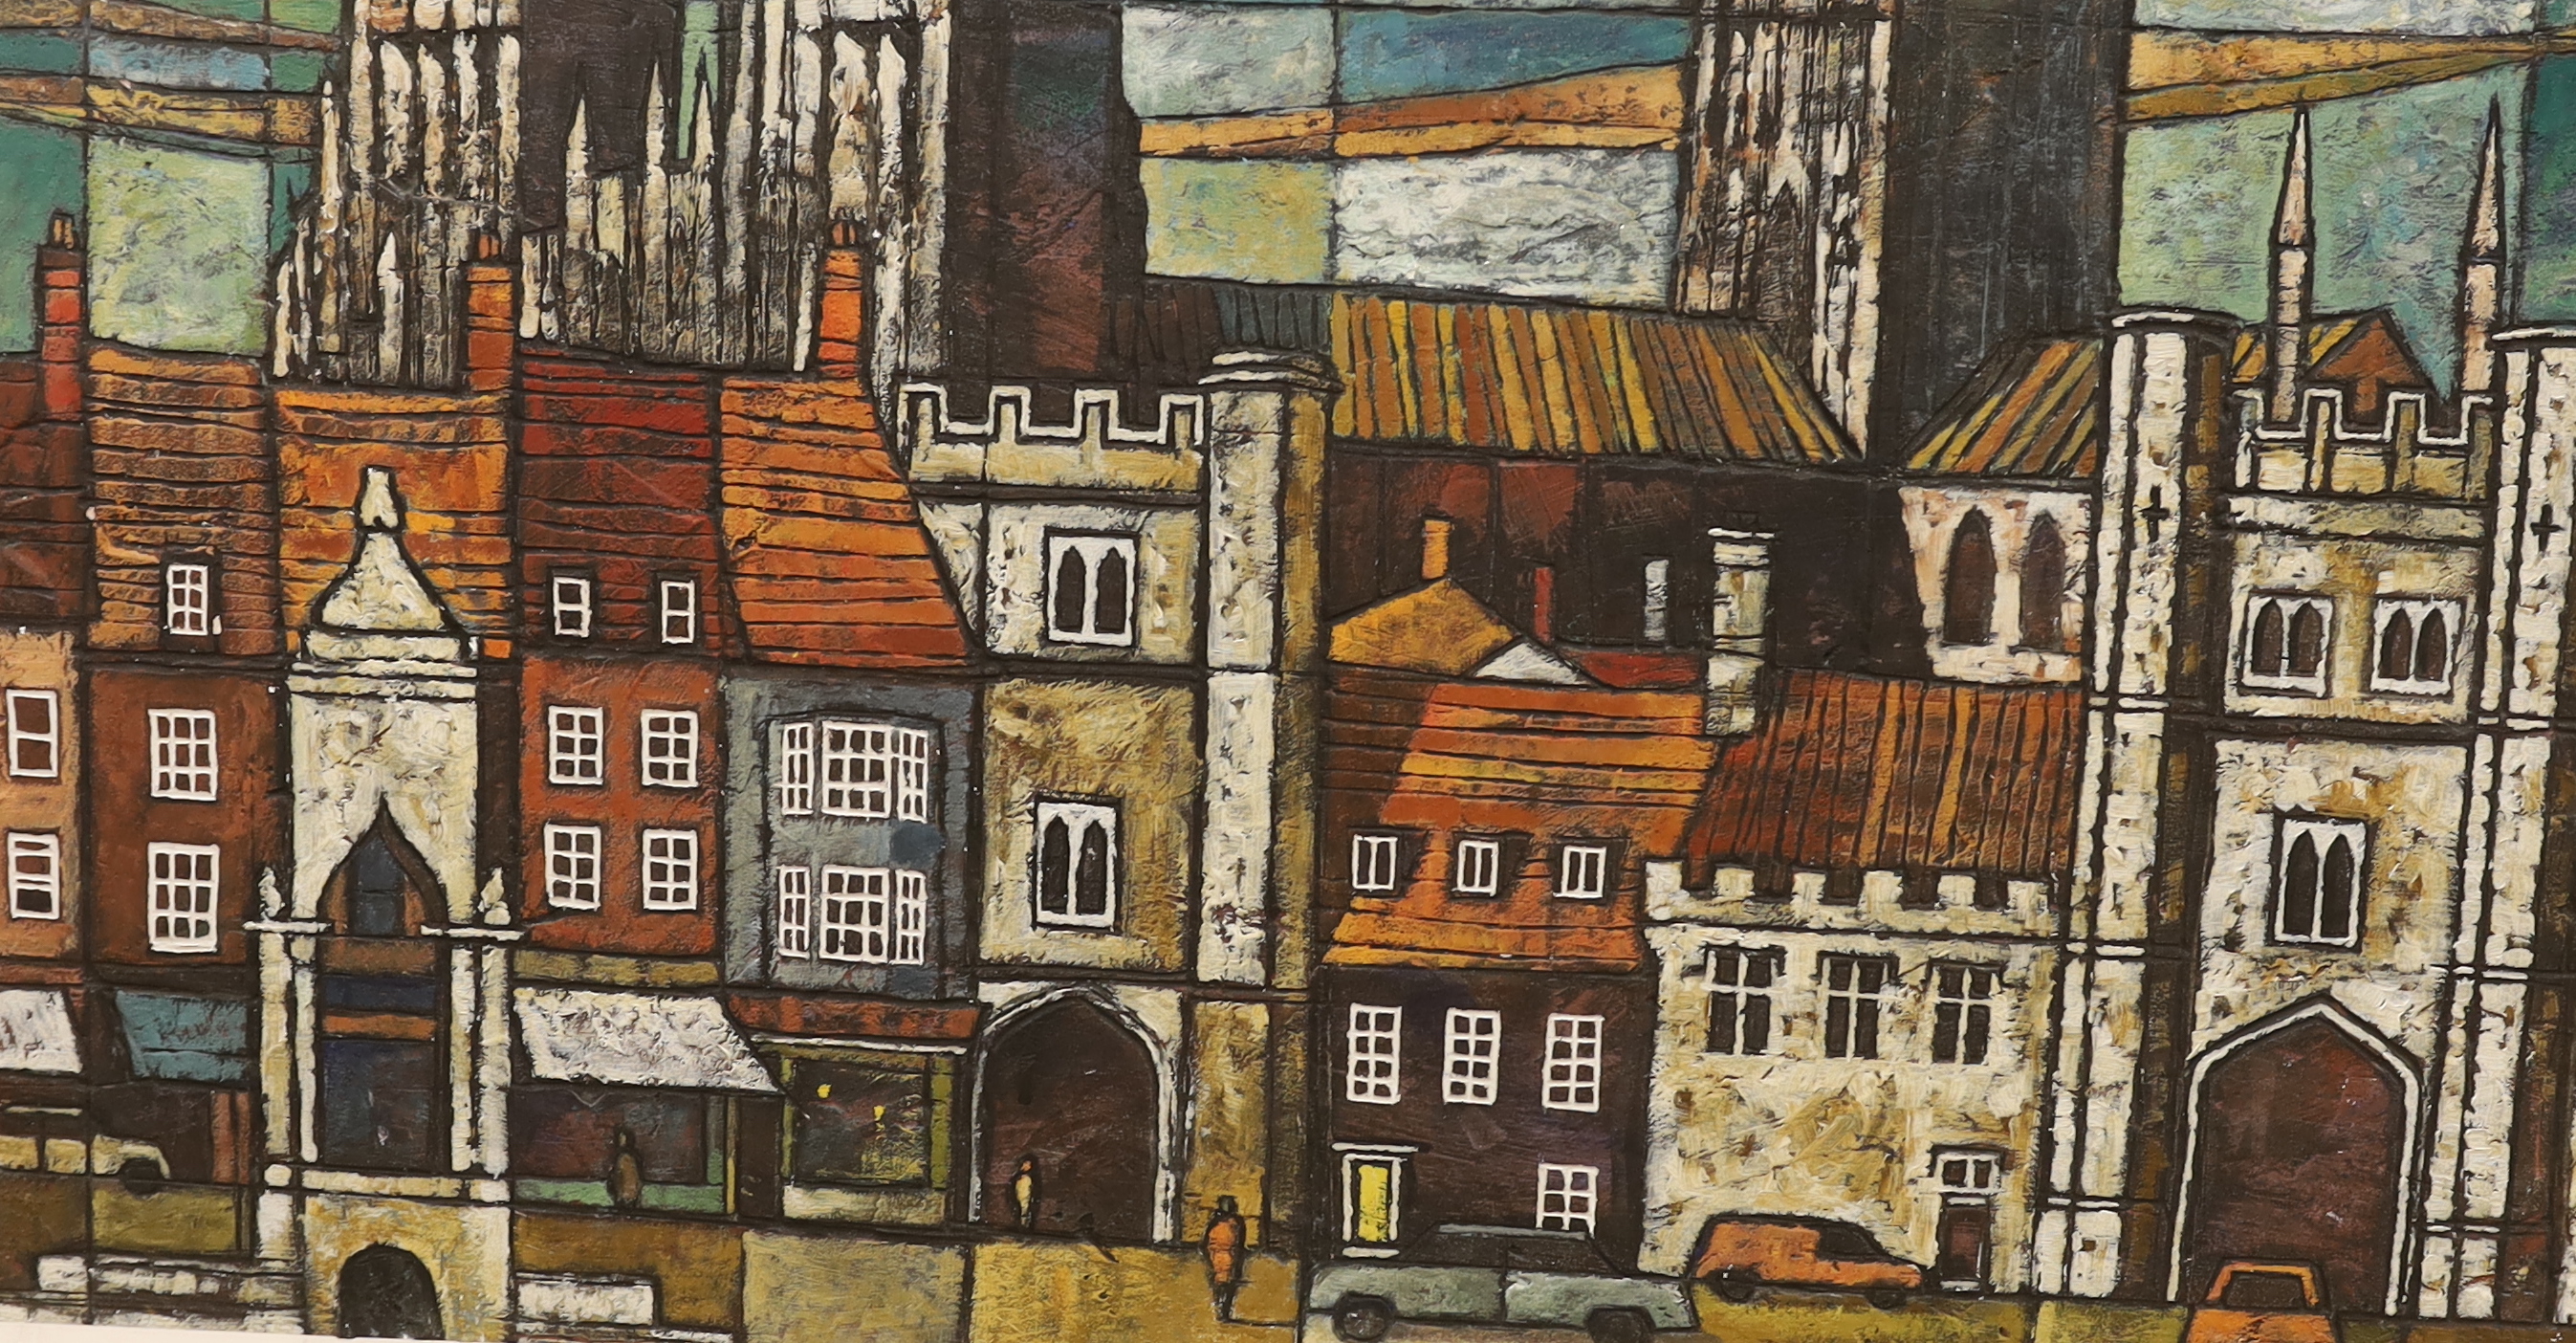 Ken Law, mixed media and oil on board, Cubist style street scene, 44 x 92cm, housed in a faux bamboo frame